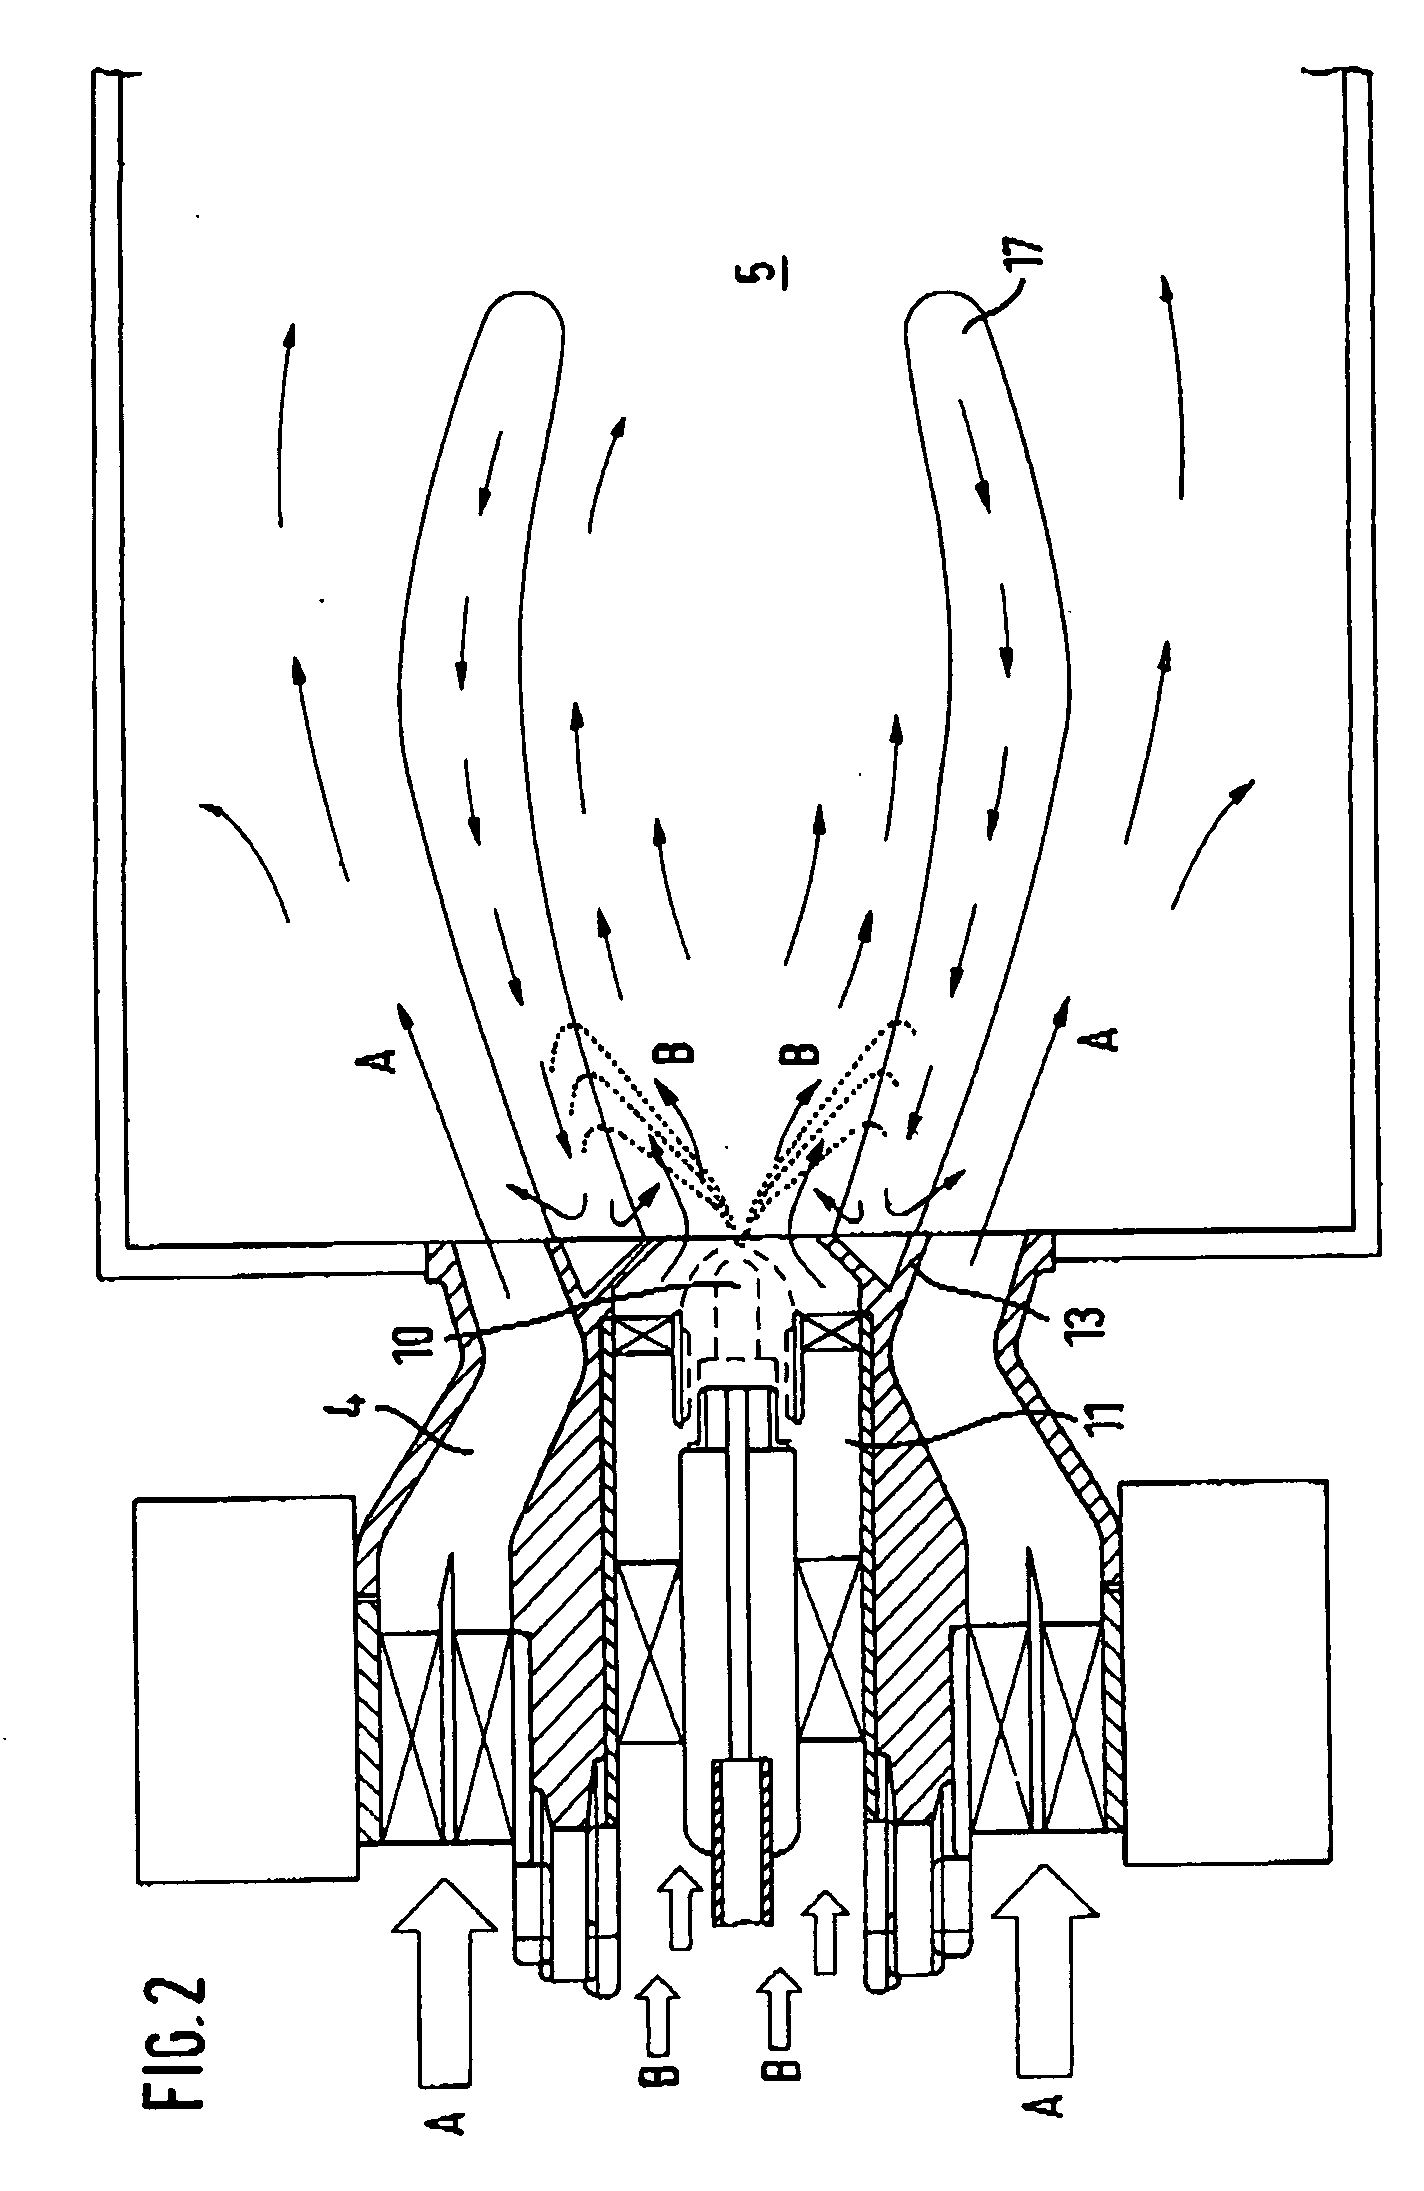 Burner for a gas-turbine combustion chamber